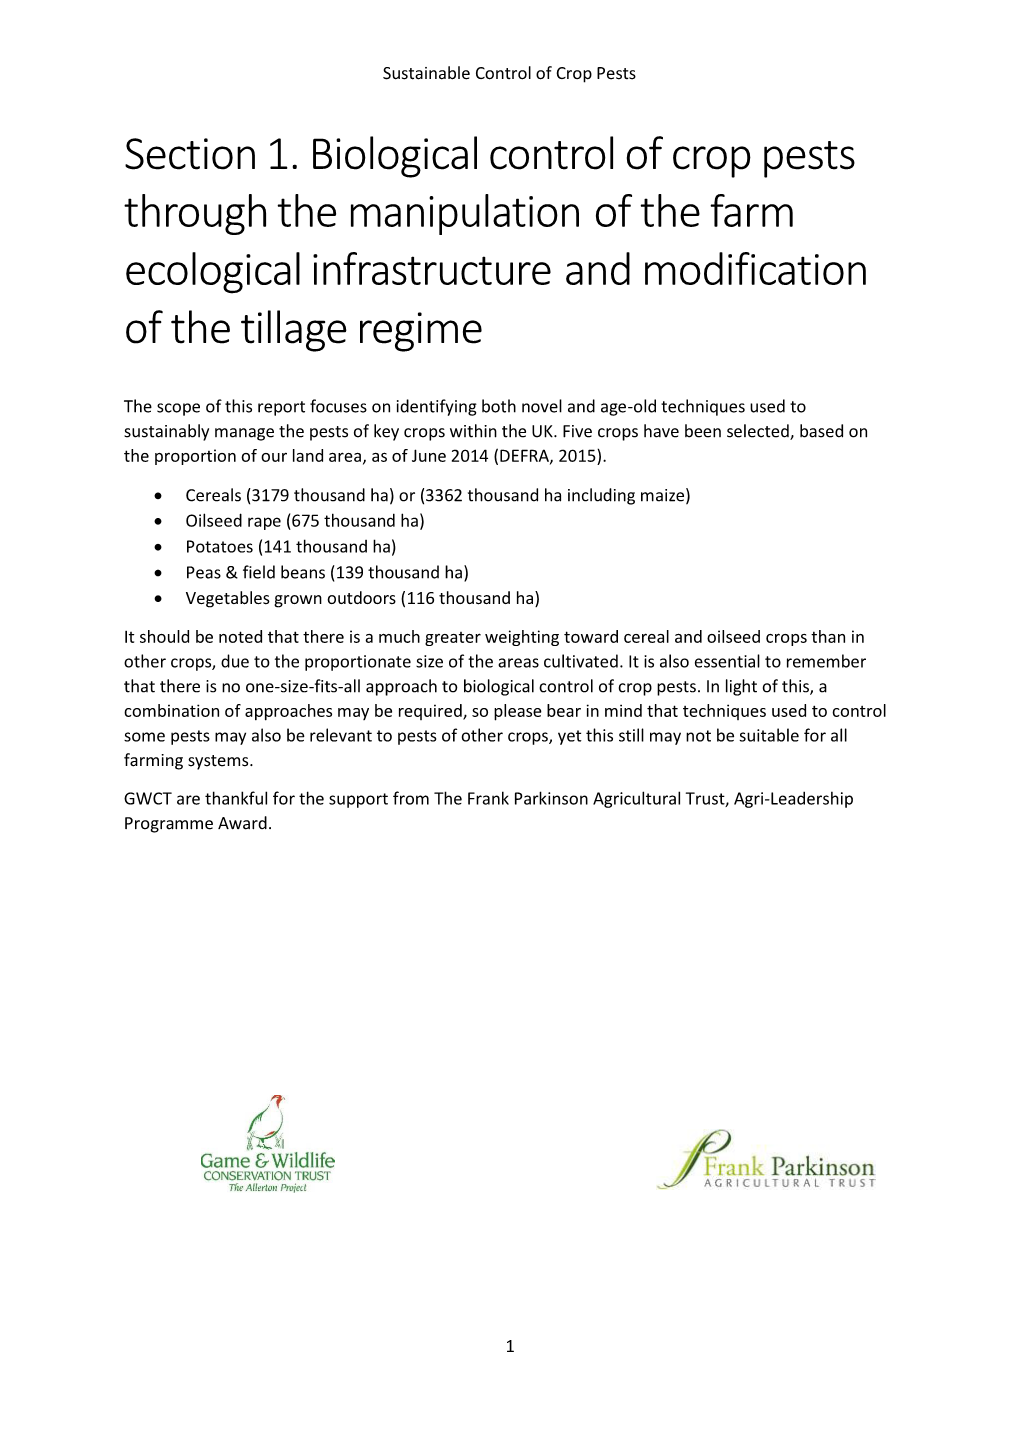 Section 1. Biological Control of Crop Pests Through the Manipulation of the Farm Ecological Infrastructure and Modification of the Tillage Regime